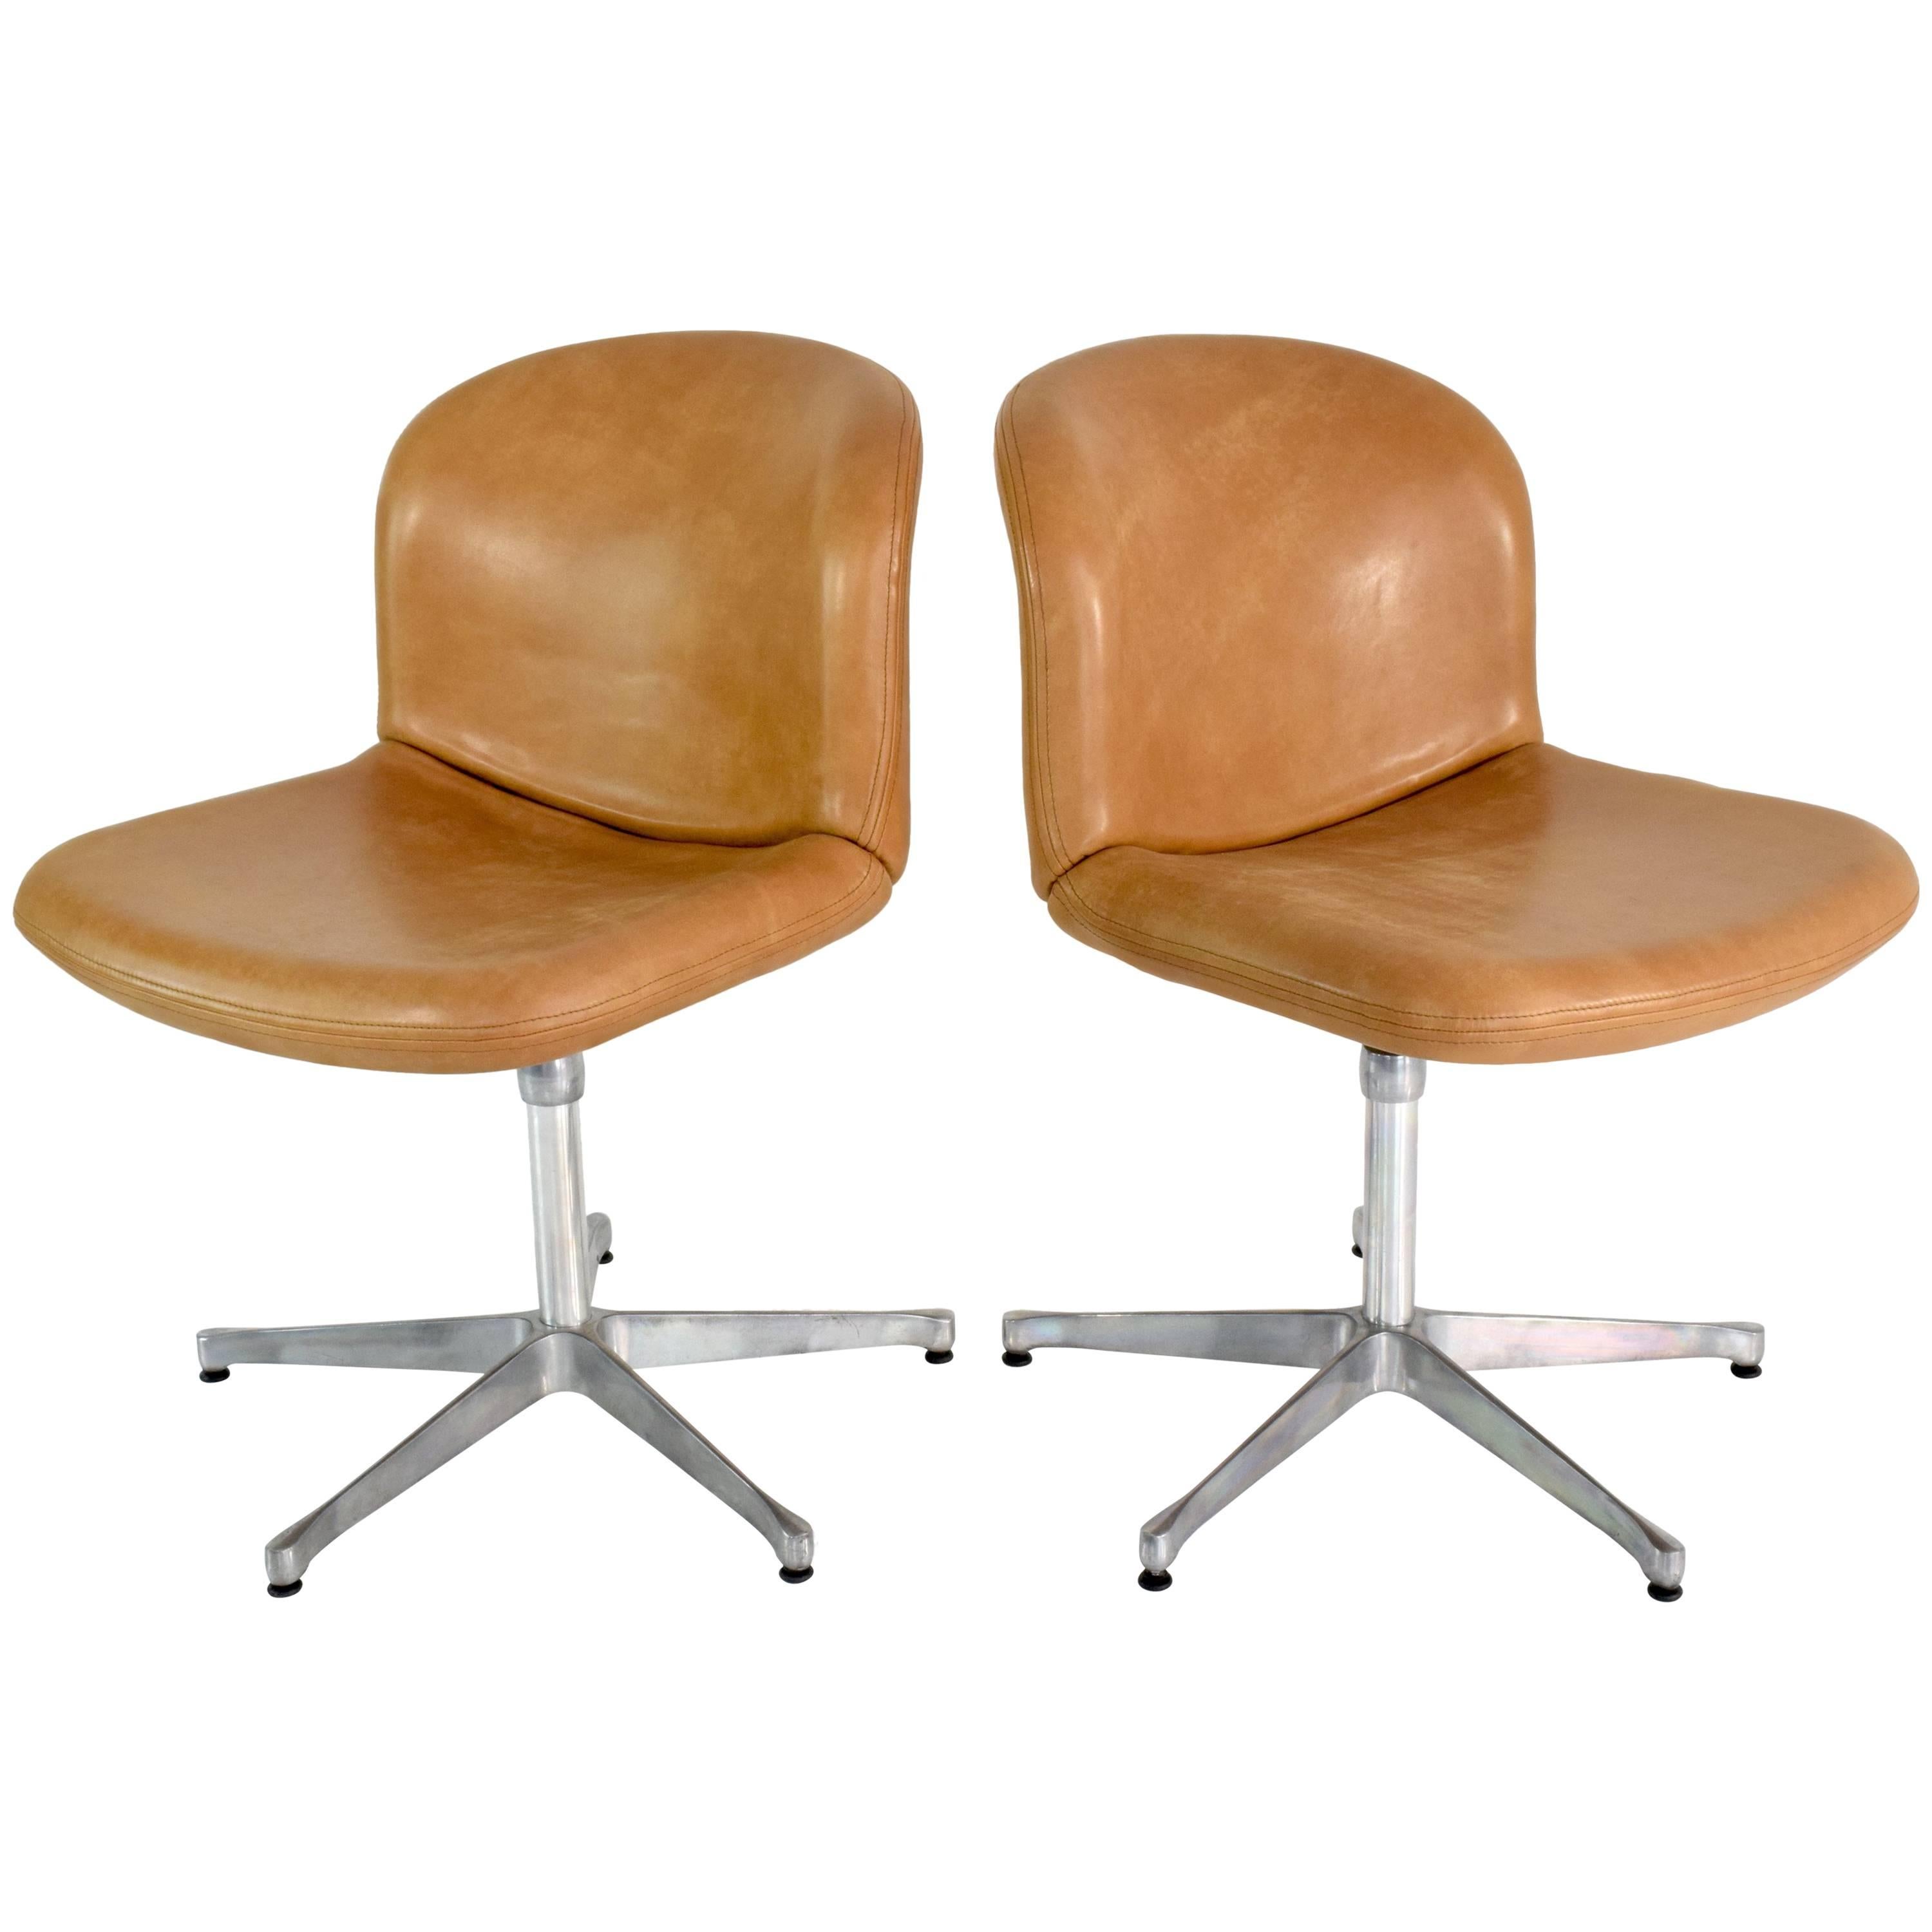 Mid-Century Ico Parisi Desk Chairs for MIM, Italy, 1950s